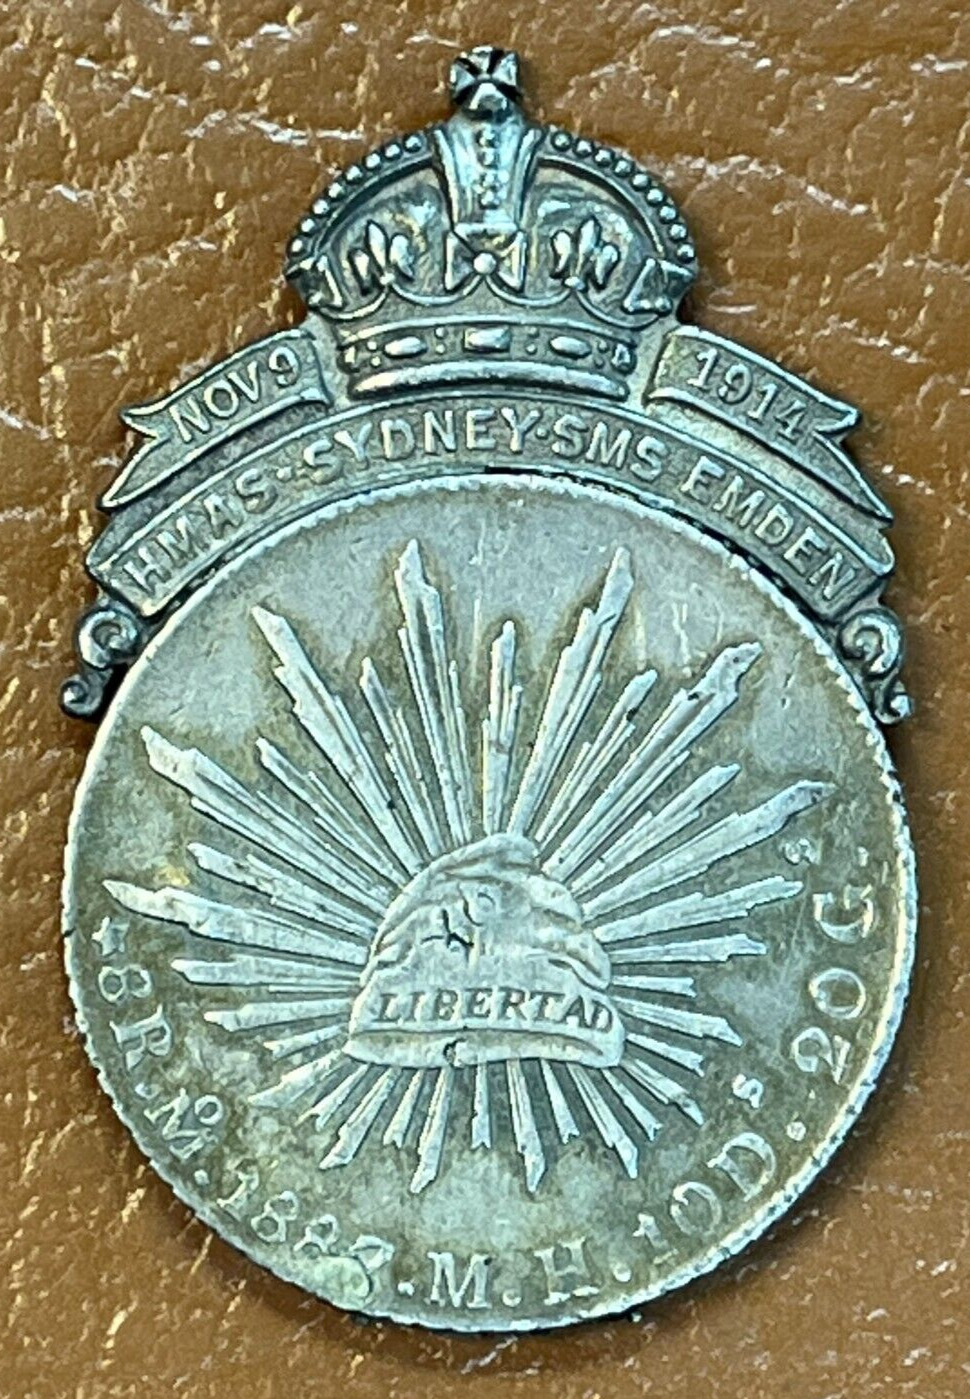 SMS Emden HMAS Sydney Battle of Cocos Silver Medal, Recovered from Wreck *RARE*